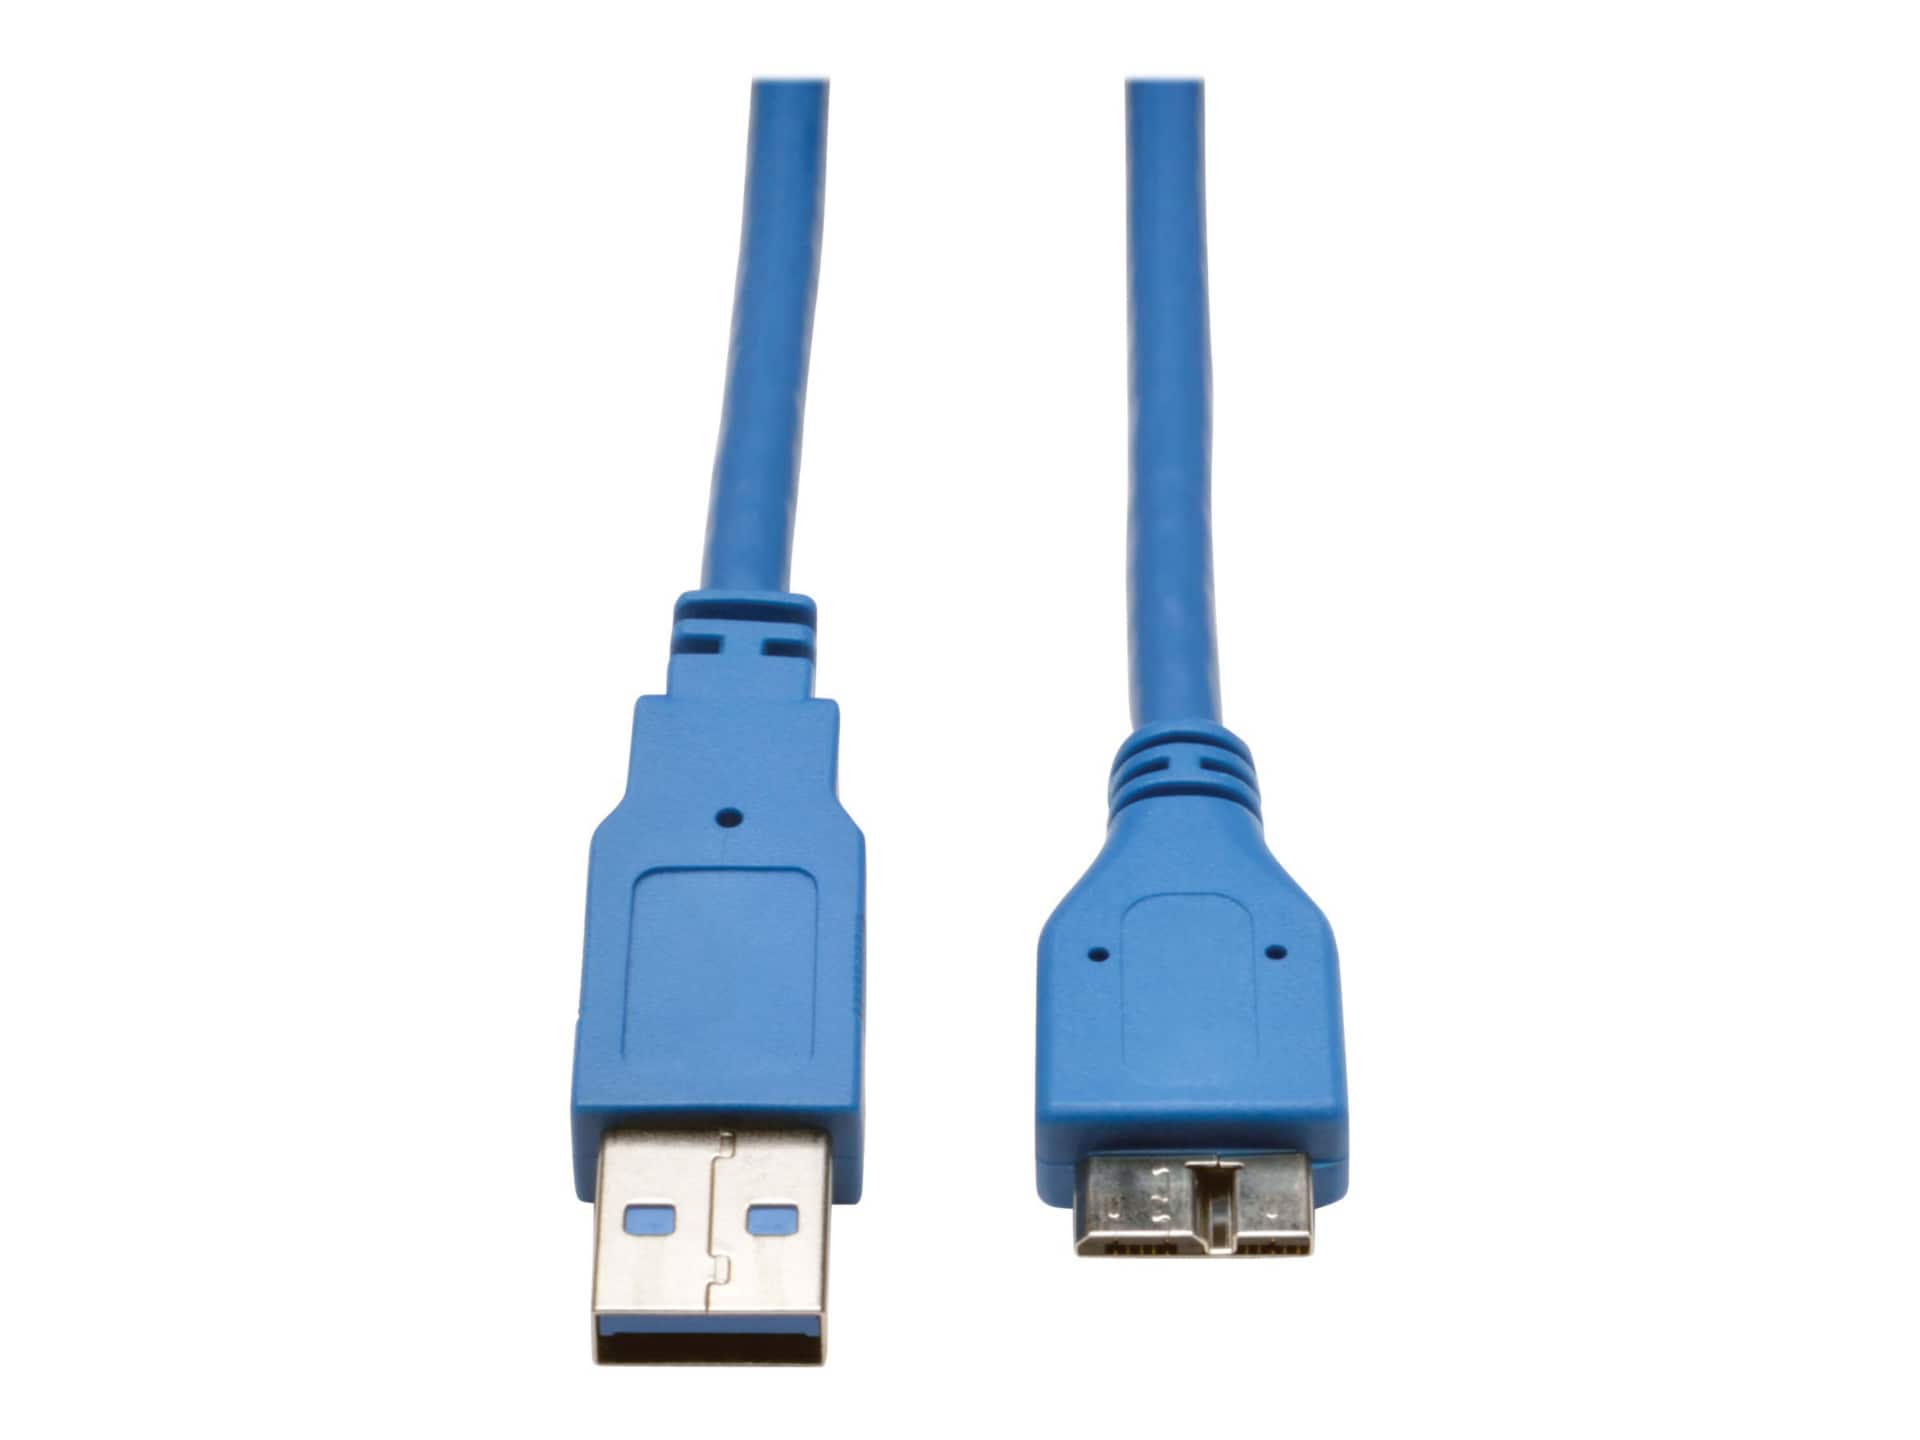 Eaton Tripp Lite Series USB 3.0 SuperSpeed Device Cable (A to Micro-B M/M), Blue, 6 ft. (1,83 m) - USB cable - USB Type